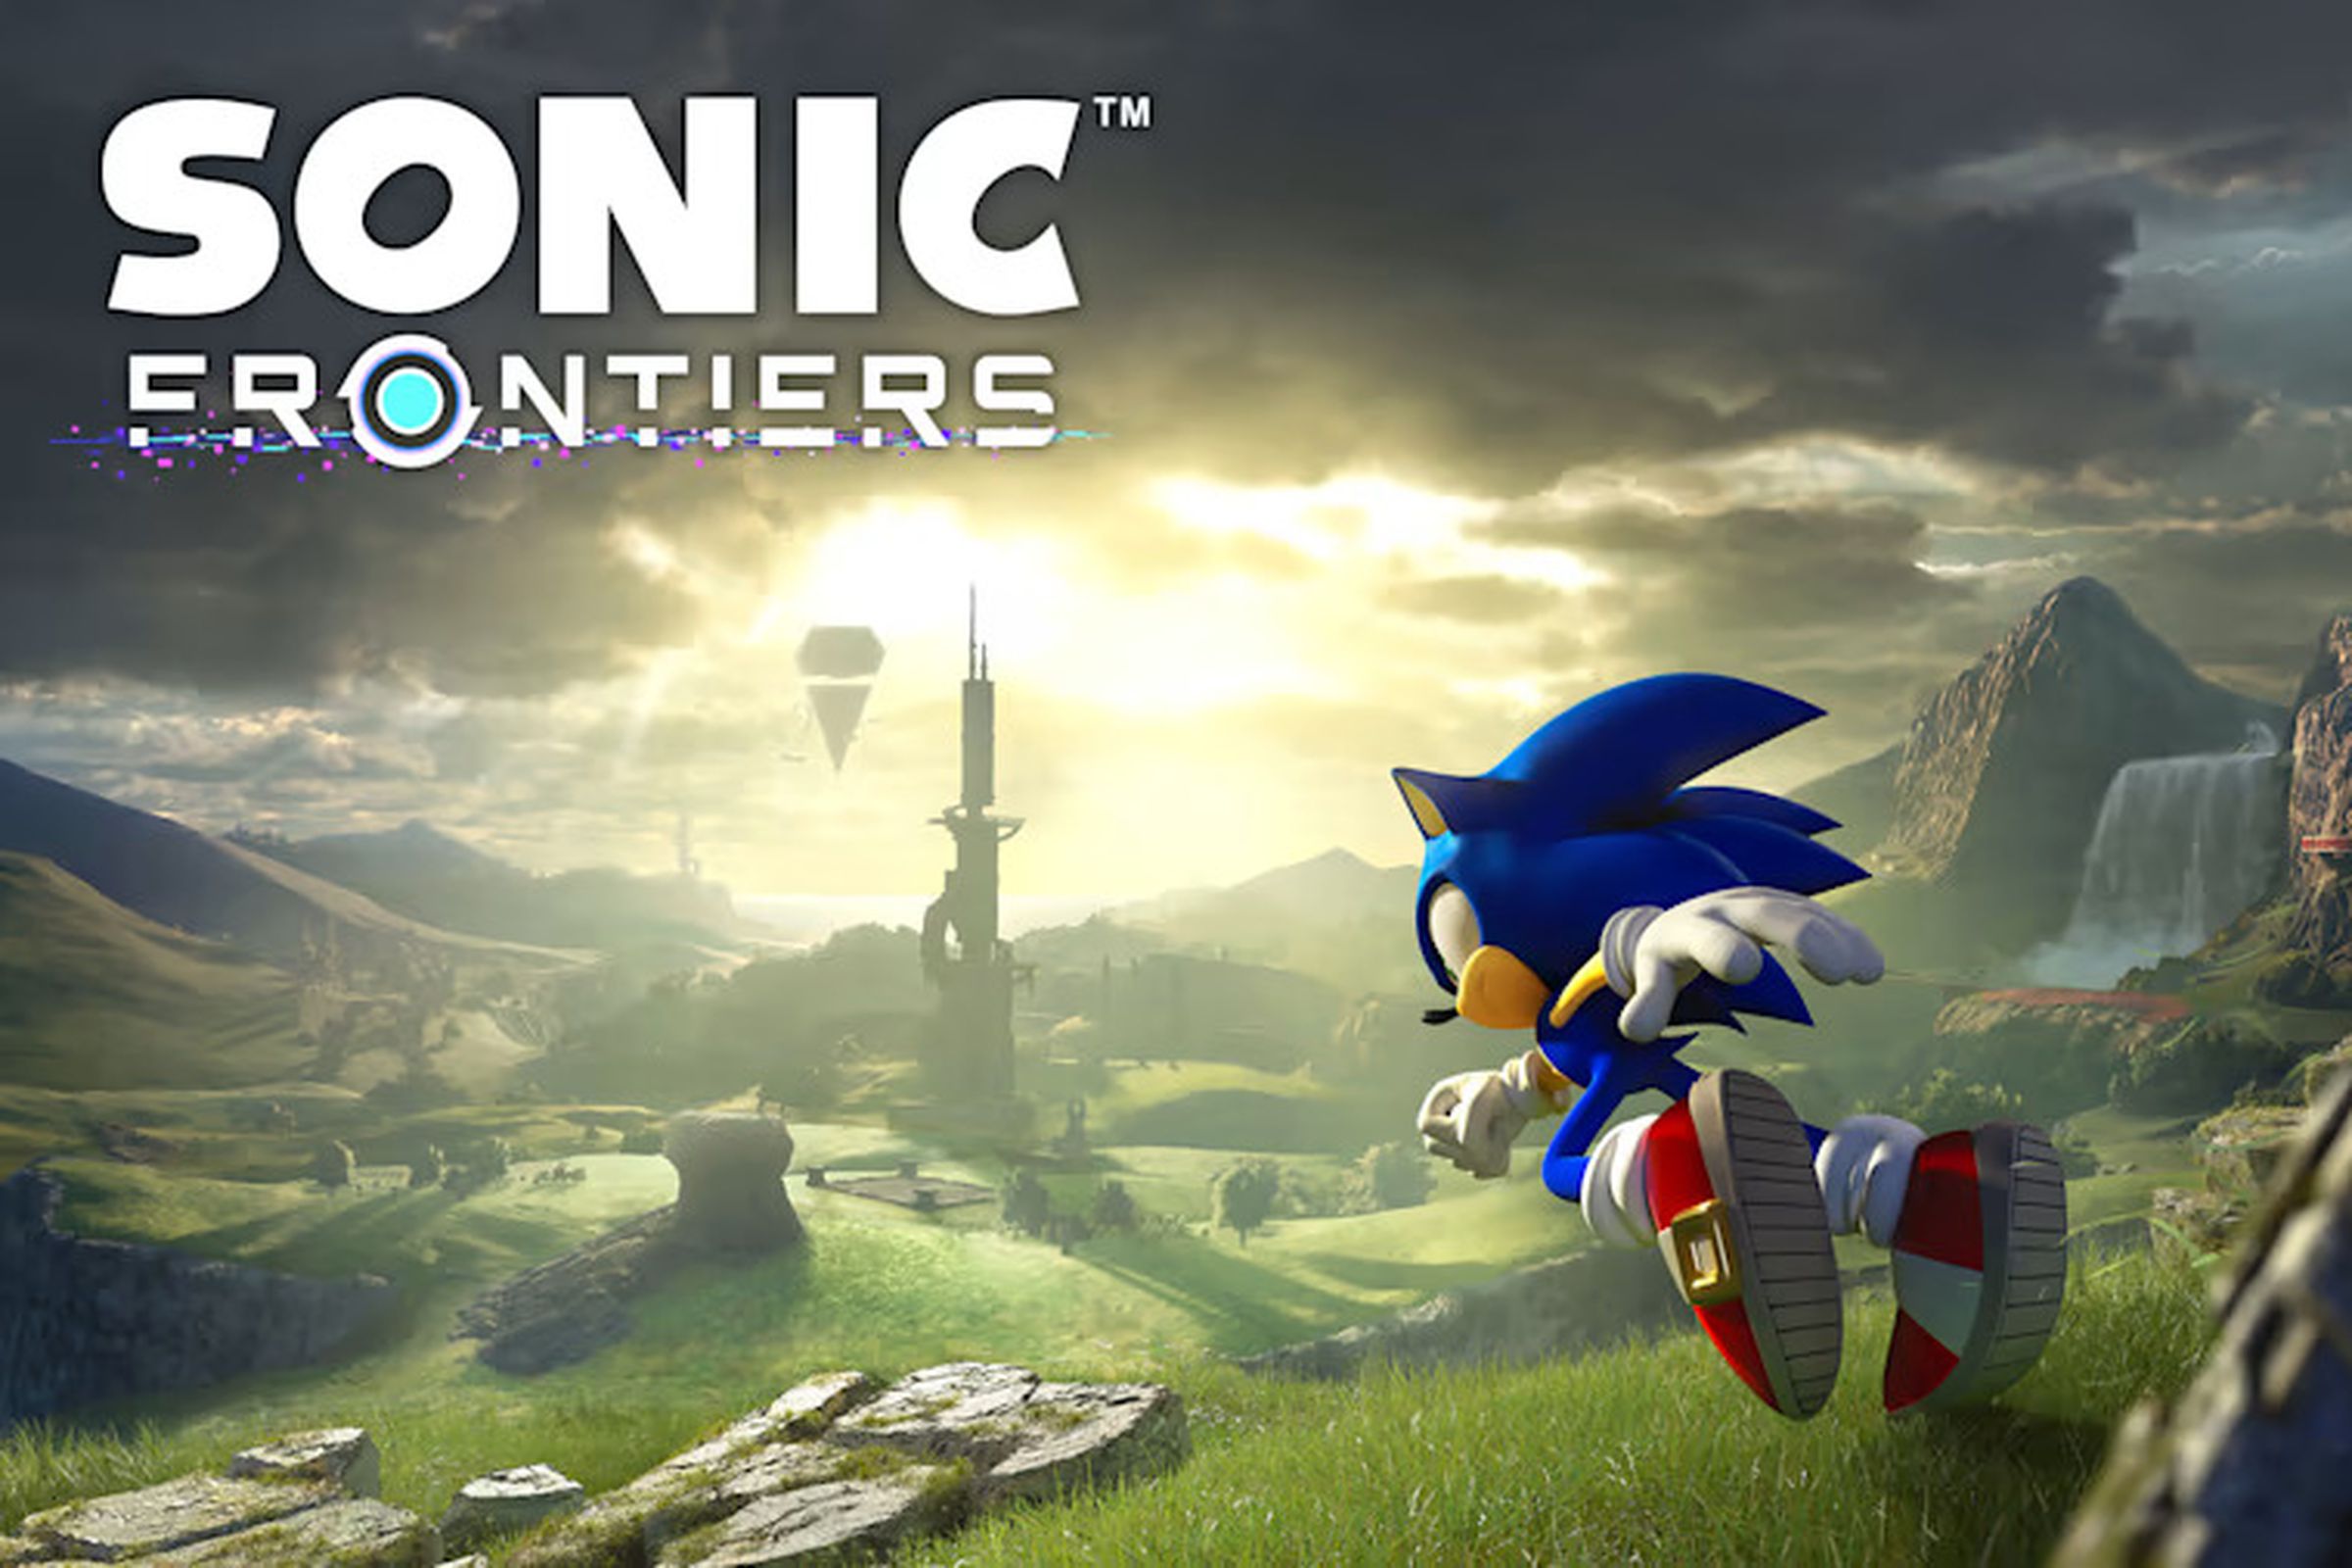 Sonic the Hedgehog leaping into the distance toward a tall tower encircled by stone ruins